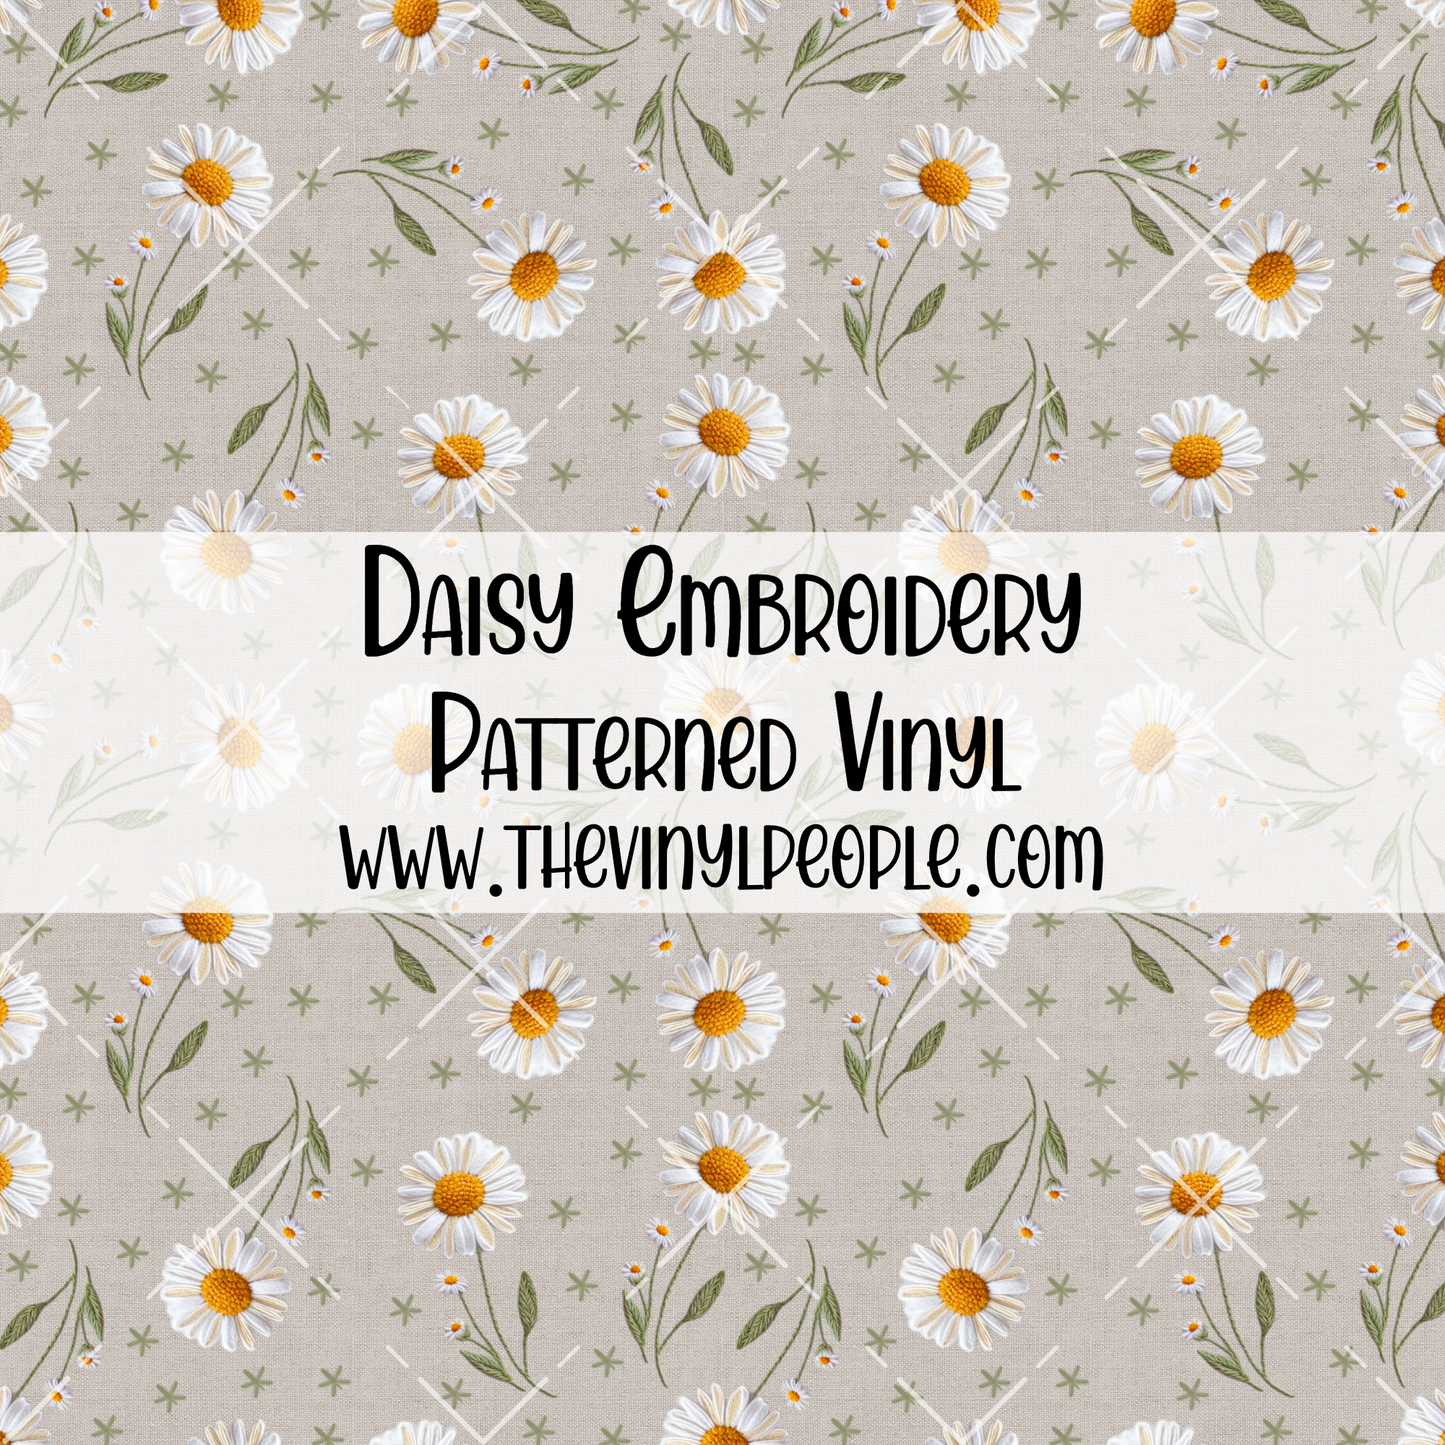 Daisy Embroidery Patterned Vinyl